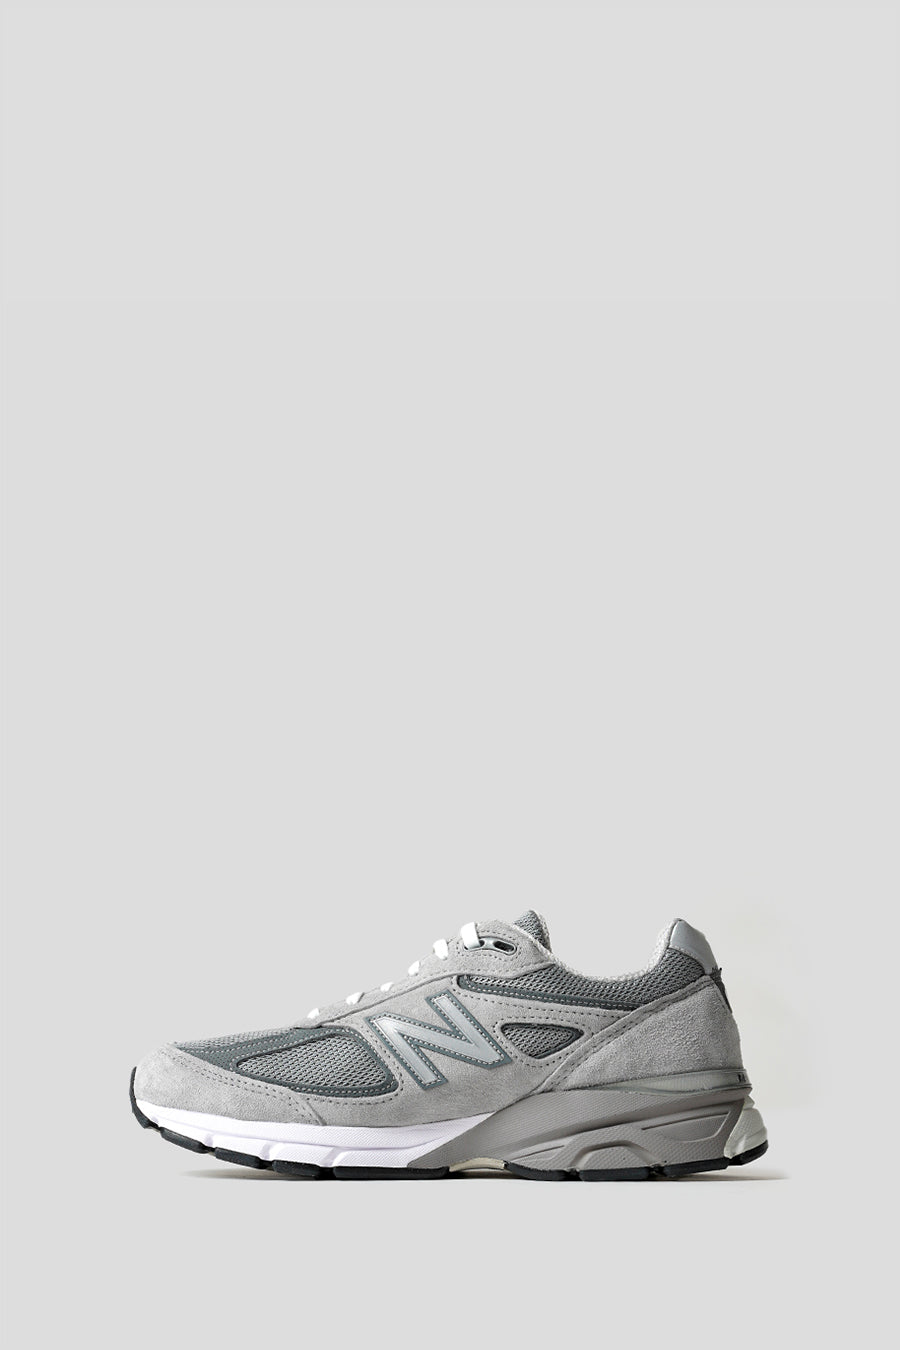 BALANCE - GREY AND SILVER MADE IN USA 990V4 SNEAKERS – LE LABO STORE